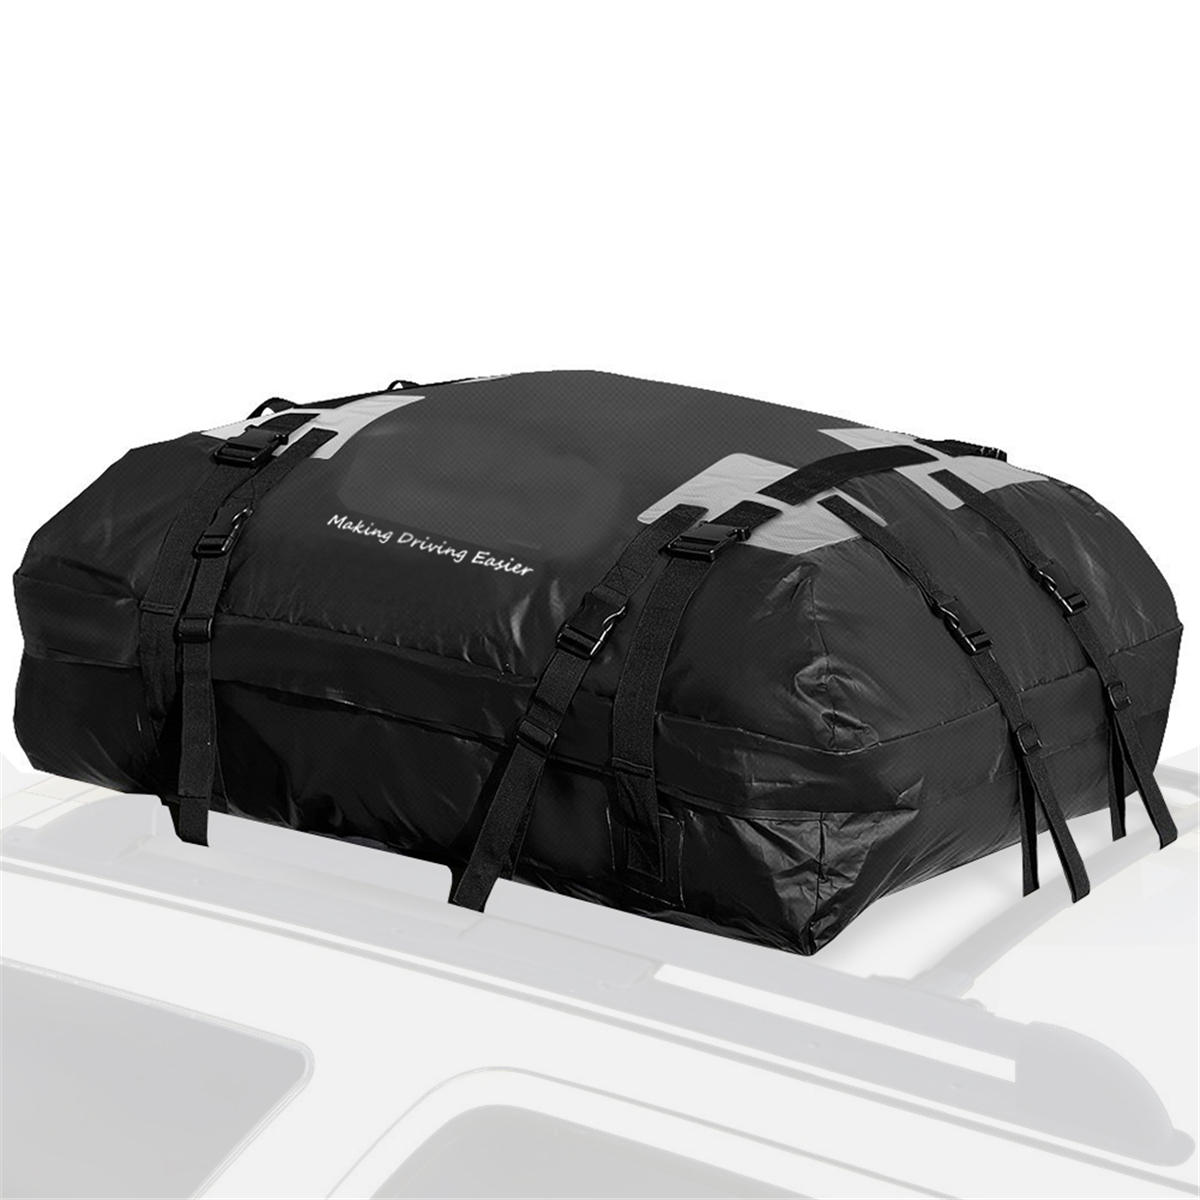 Outdoor Travel Car Roof Rack Sac Pack Waterproof Cargo Carrier Luggage Storage Pouch